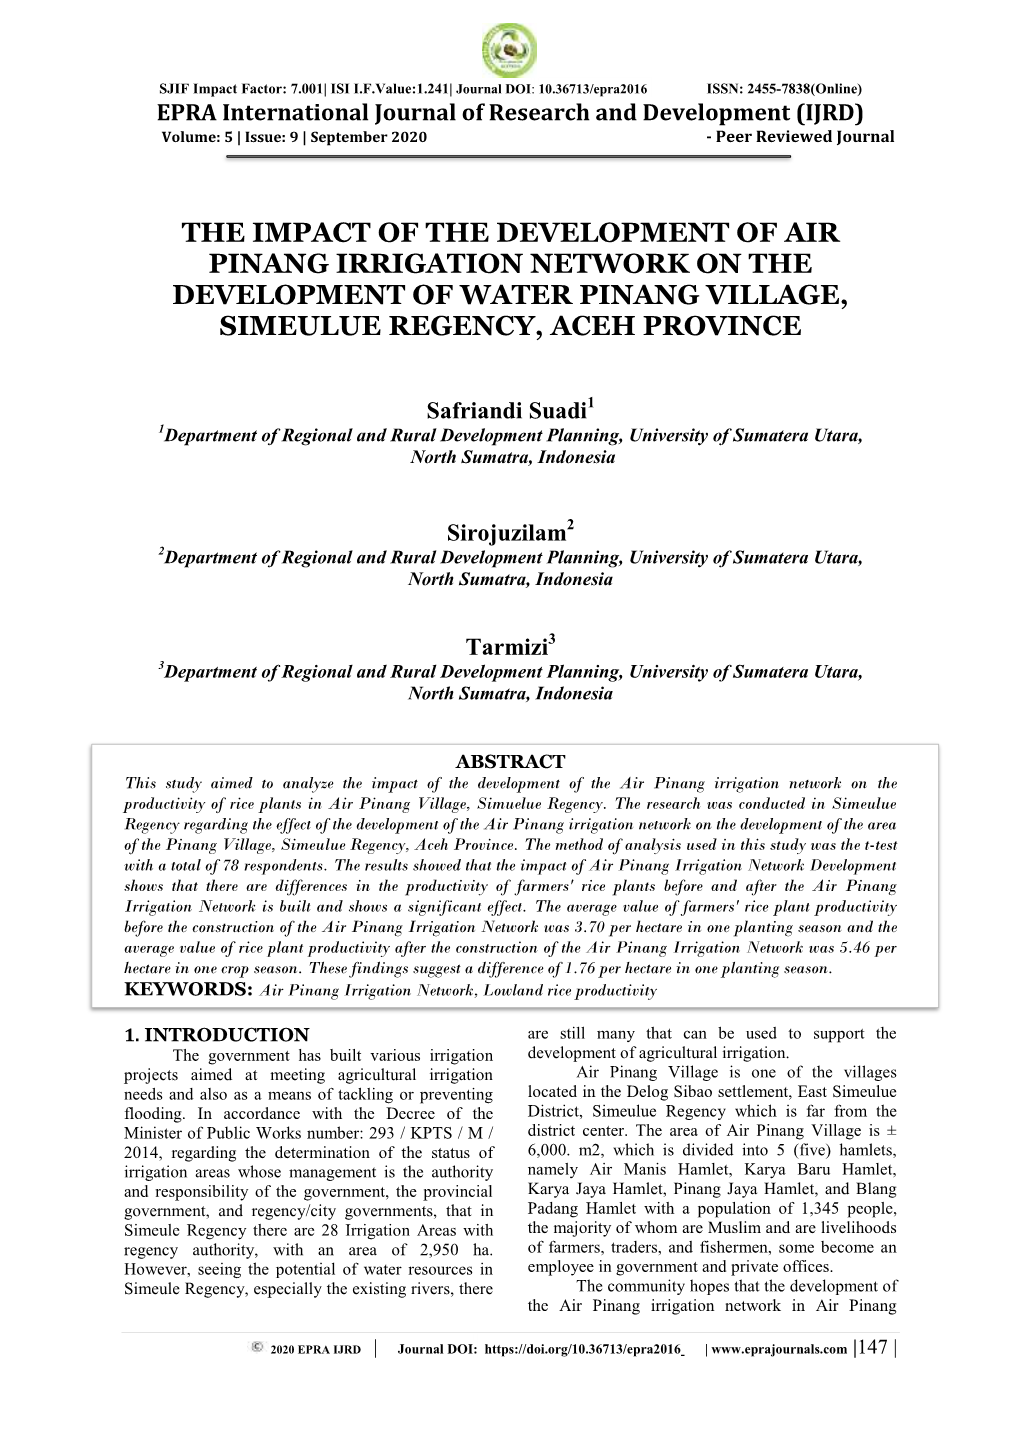 The Impact of the Development of Air Pinang Irrigation Network on the Development of Water Pinang Village, Simeulue Regency, Aceh Province